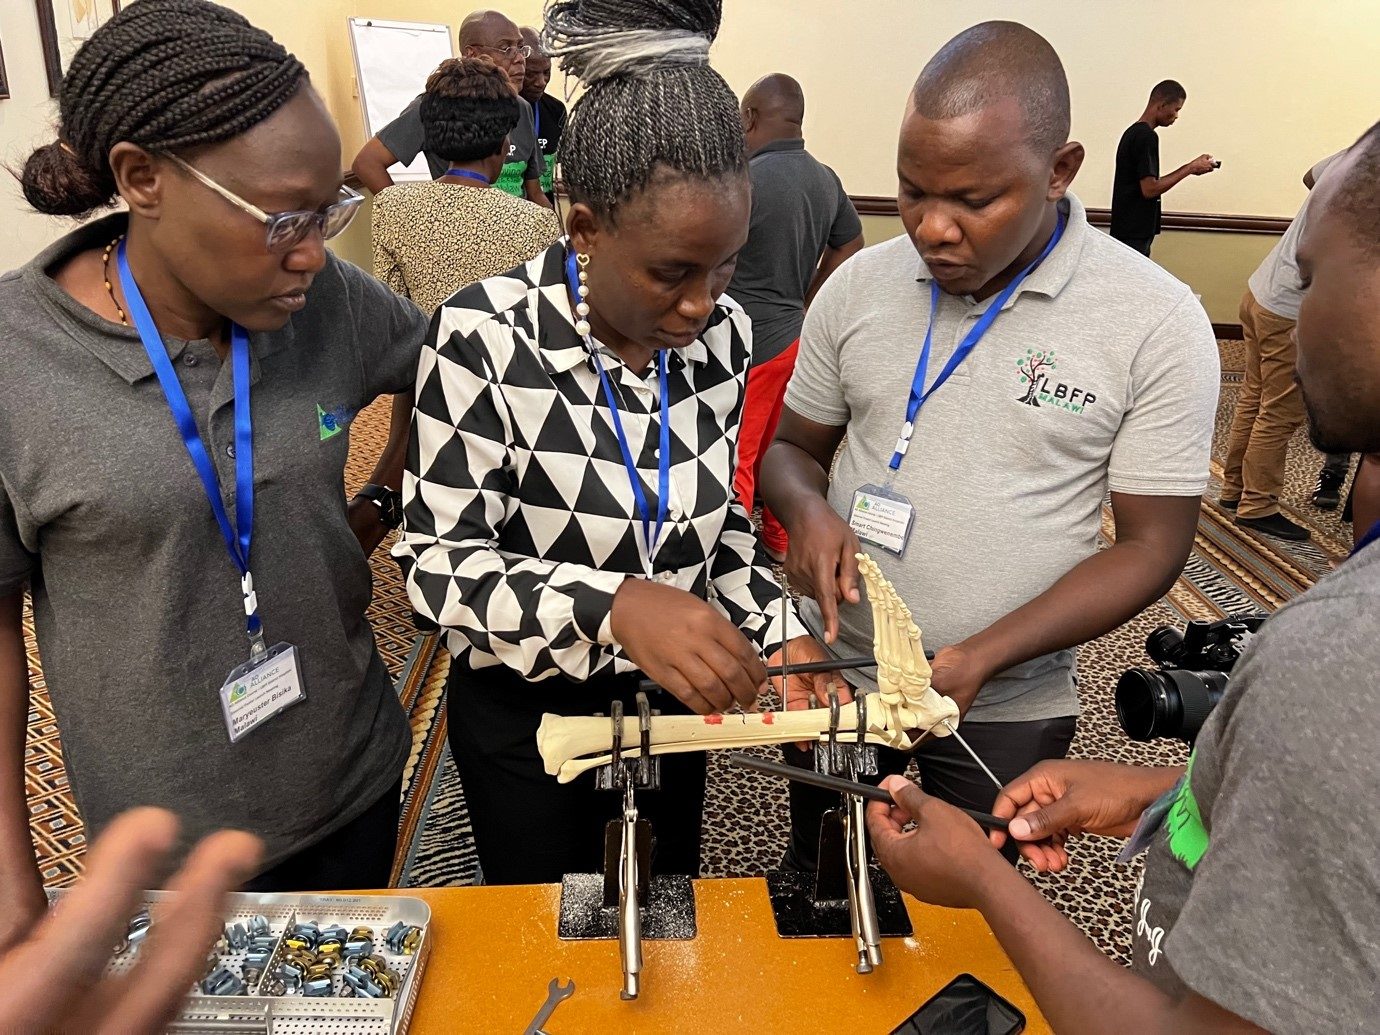 Training on External Fixation for Orthopedic Clinical Officers in Malawi